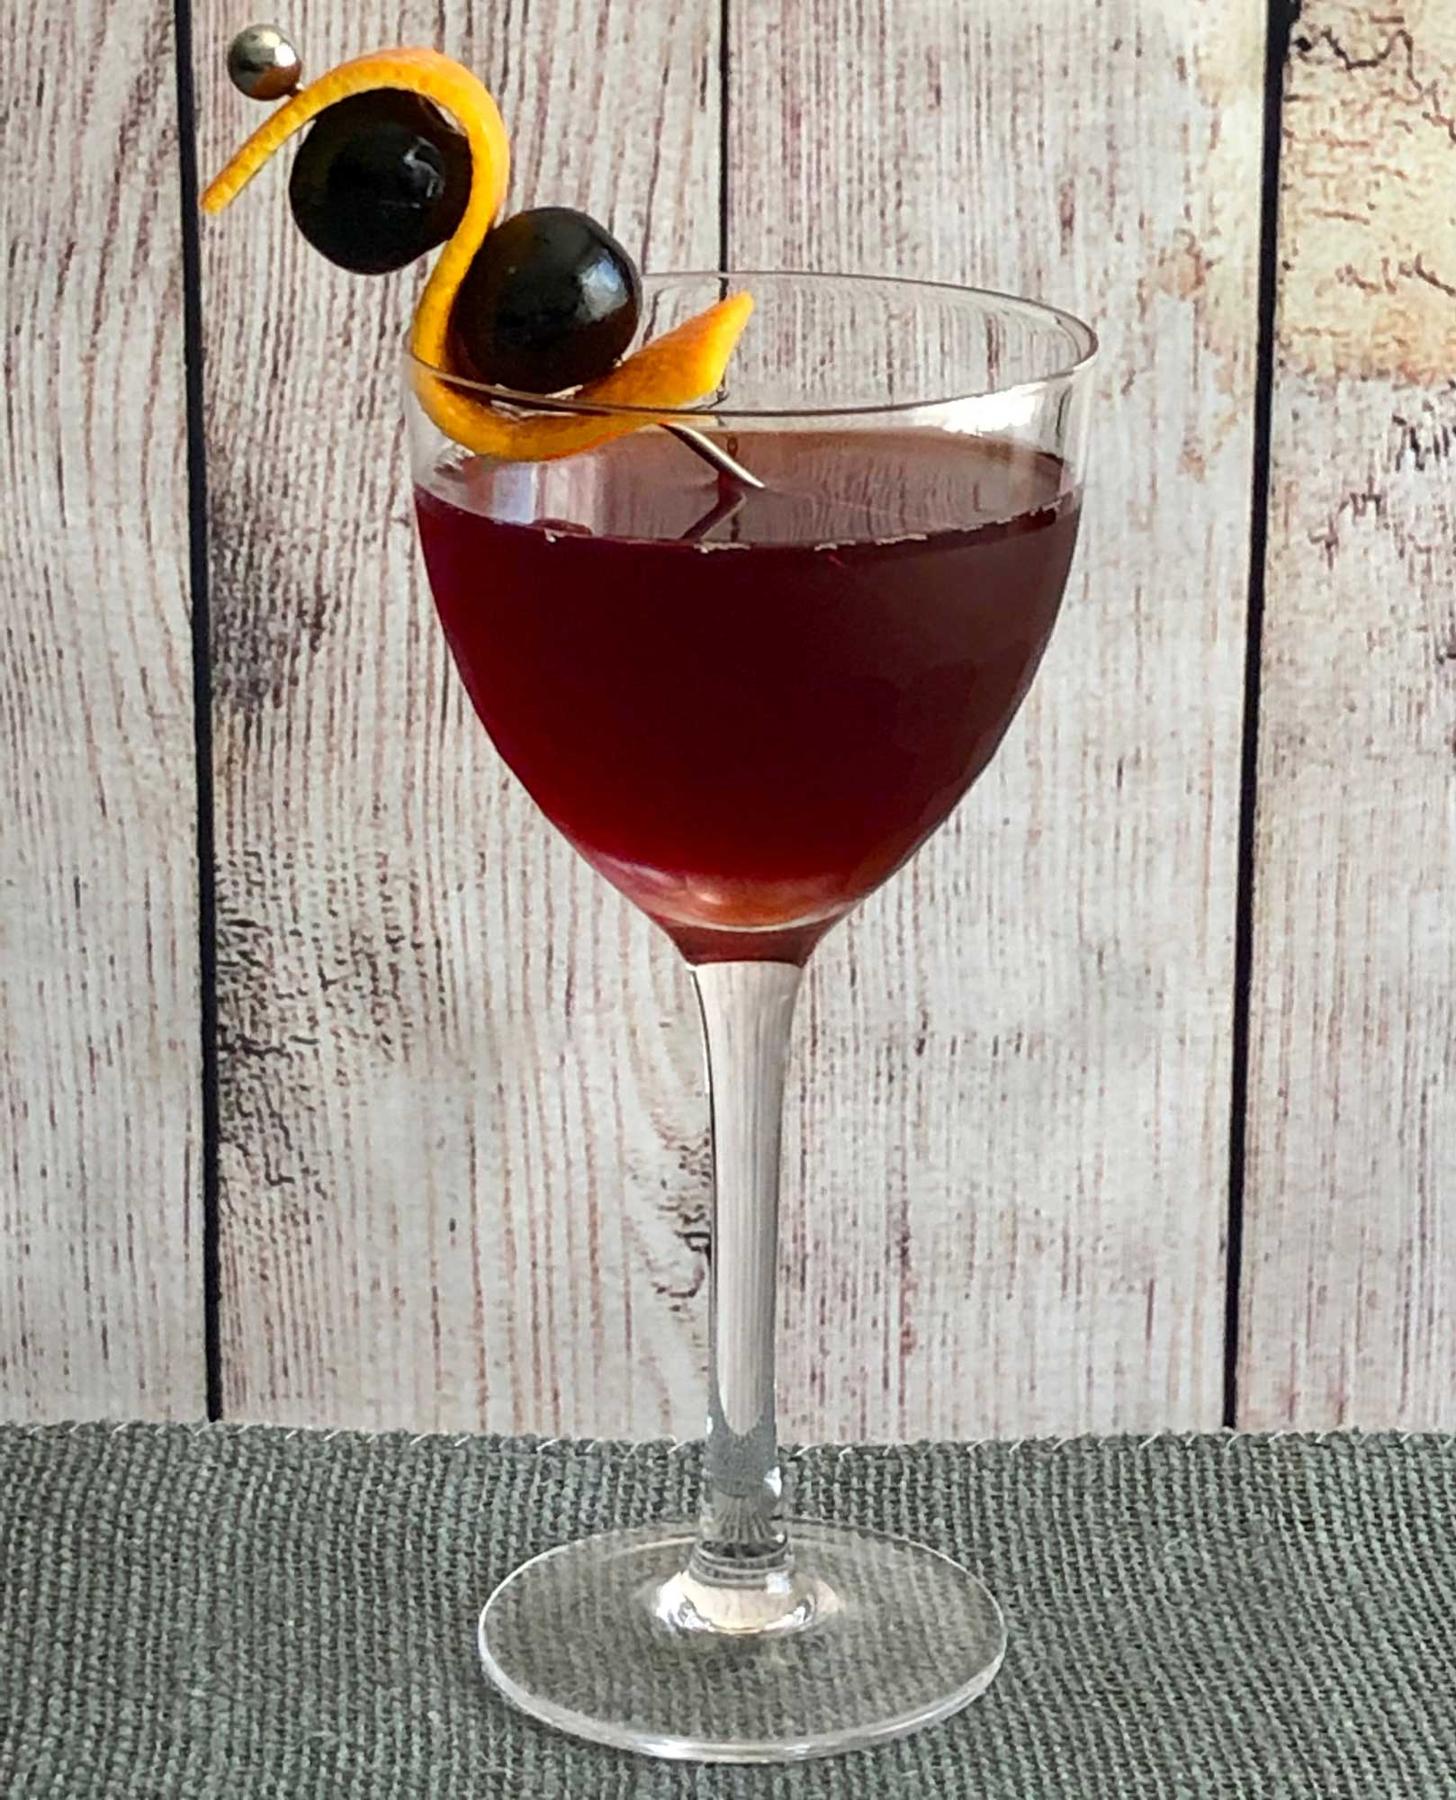 An example of the Booker’s Manhattan, the mixed drink (drink), by T. Leggett, The Roosevelt, Richmond, VA, featuring Booker’s Bourbon, Cocchi Barolo Chinato, Angostura bitters, orange twist, and maraschino cherry; photo by Lee Edwards